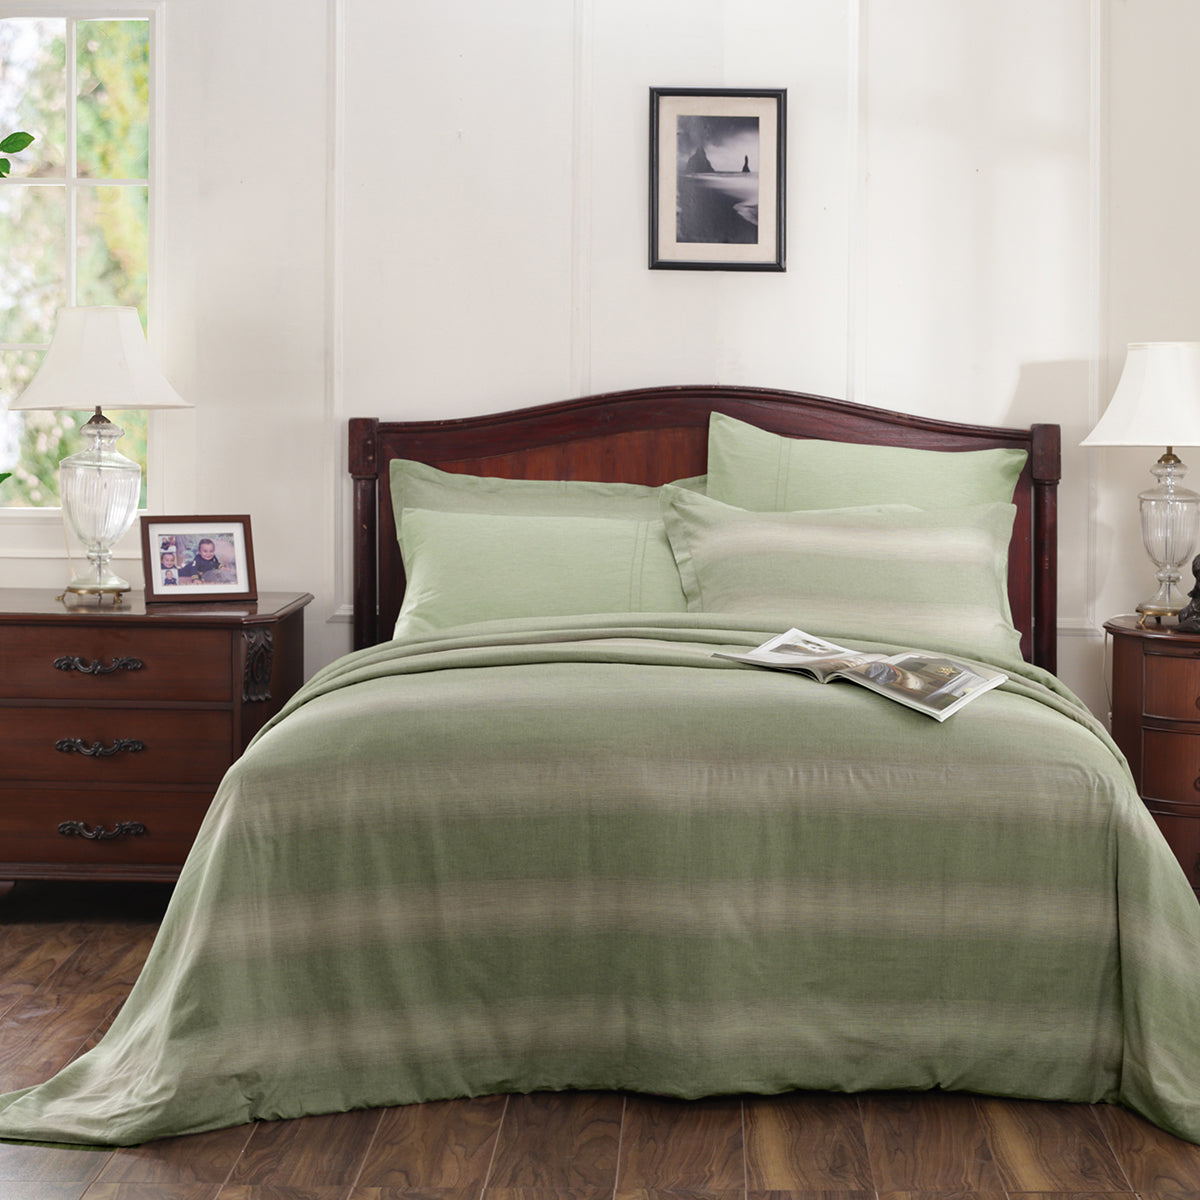 Rhythmic Stripe Reversible Made With Egyptian Cotton Ultra Soft Chameleon Green/Chinchilla Duvet Cover with Pillow Case